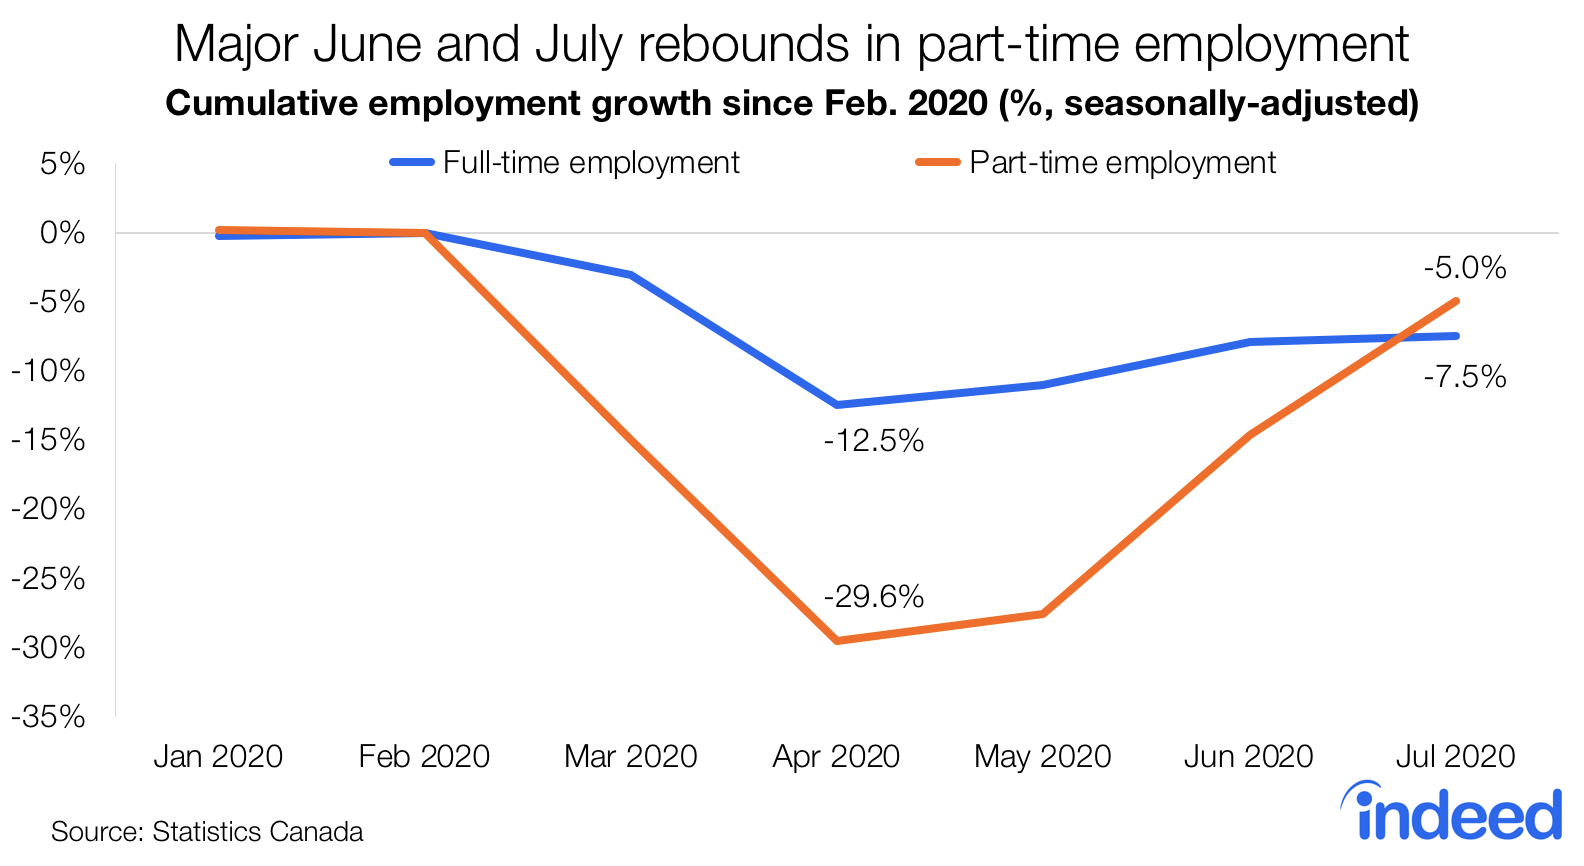 Line graph titled “Major June and July rebounds in part-time employment.” Graph shows the cumulative employment growth since Feb. 2020 (%, seasonally-adjusted) and shows two lines- full-time employment and part-time employment. While both lines decreased after the start of the pandemic, part-time employment took the hardest hit, with a -29.6% in April compared to the -12.5% of full-time. While full-time has slowly increased and leveled out at -7.5% in July, part-time has rebounded up to -5% in July. Caption added post-publication.